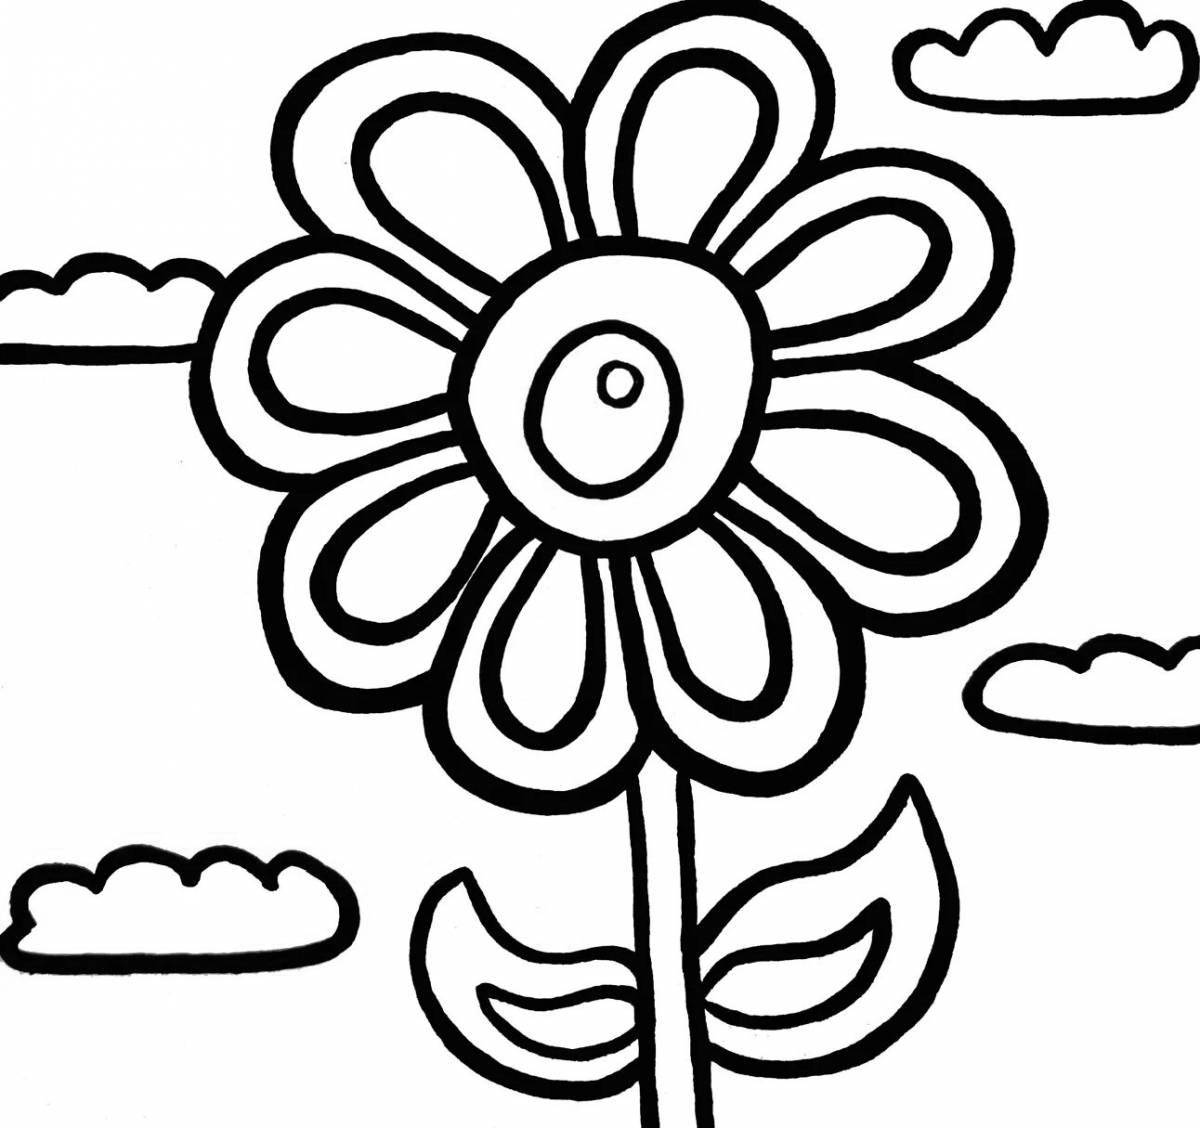 Gorgeous indie tomboy flower coloring book